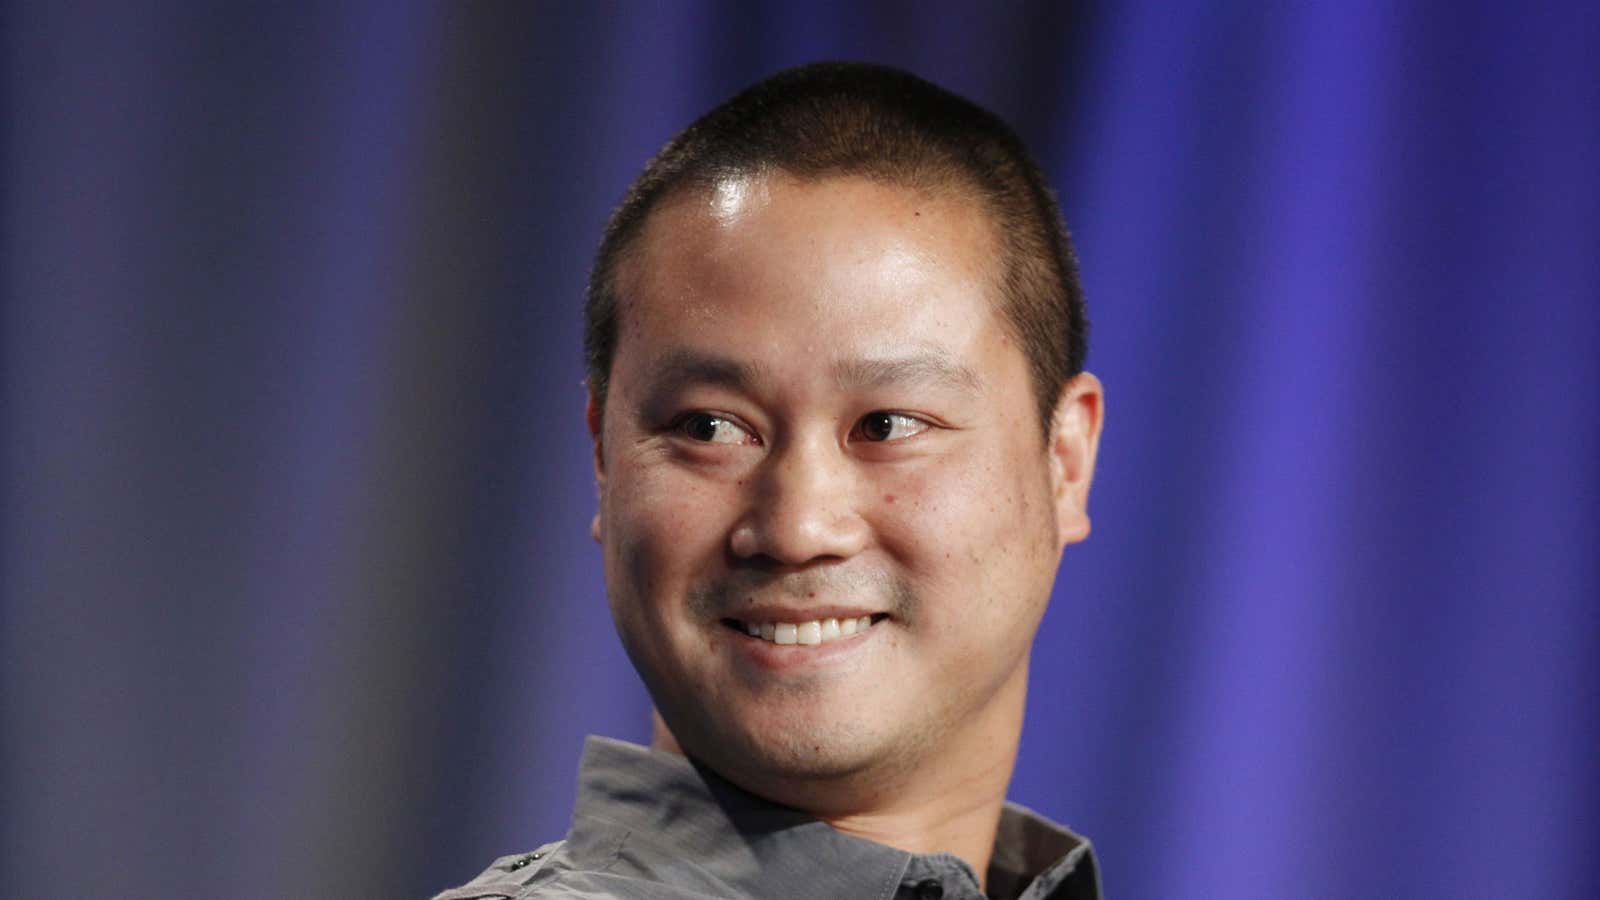 Tony Hsieh of Zappo’s is singularly focused.